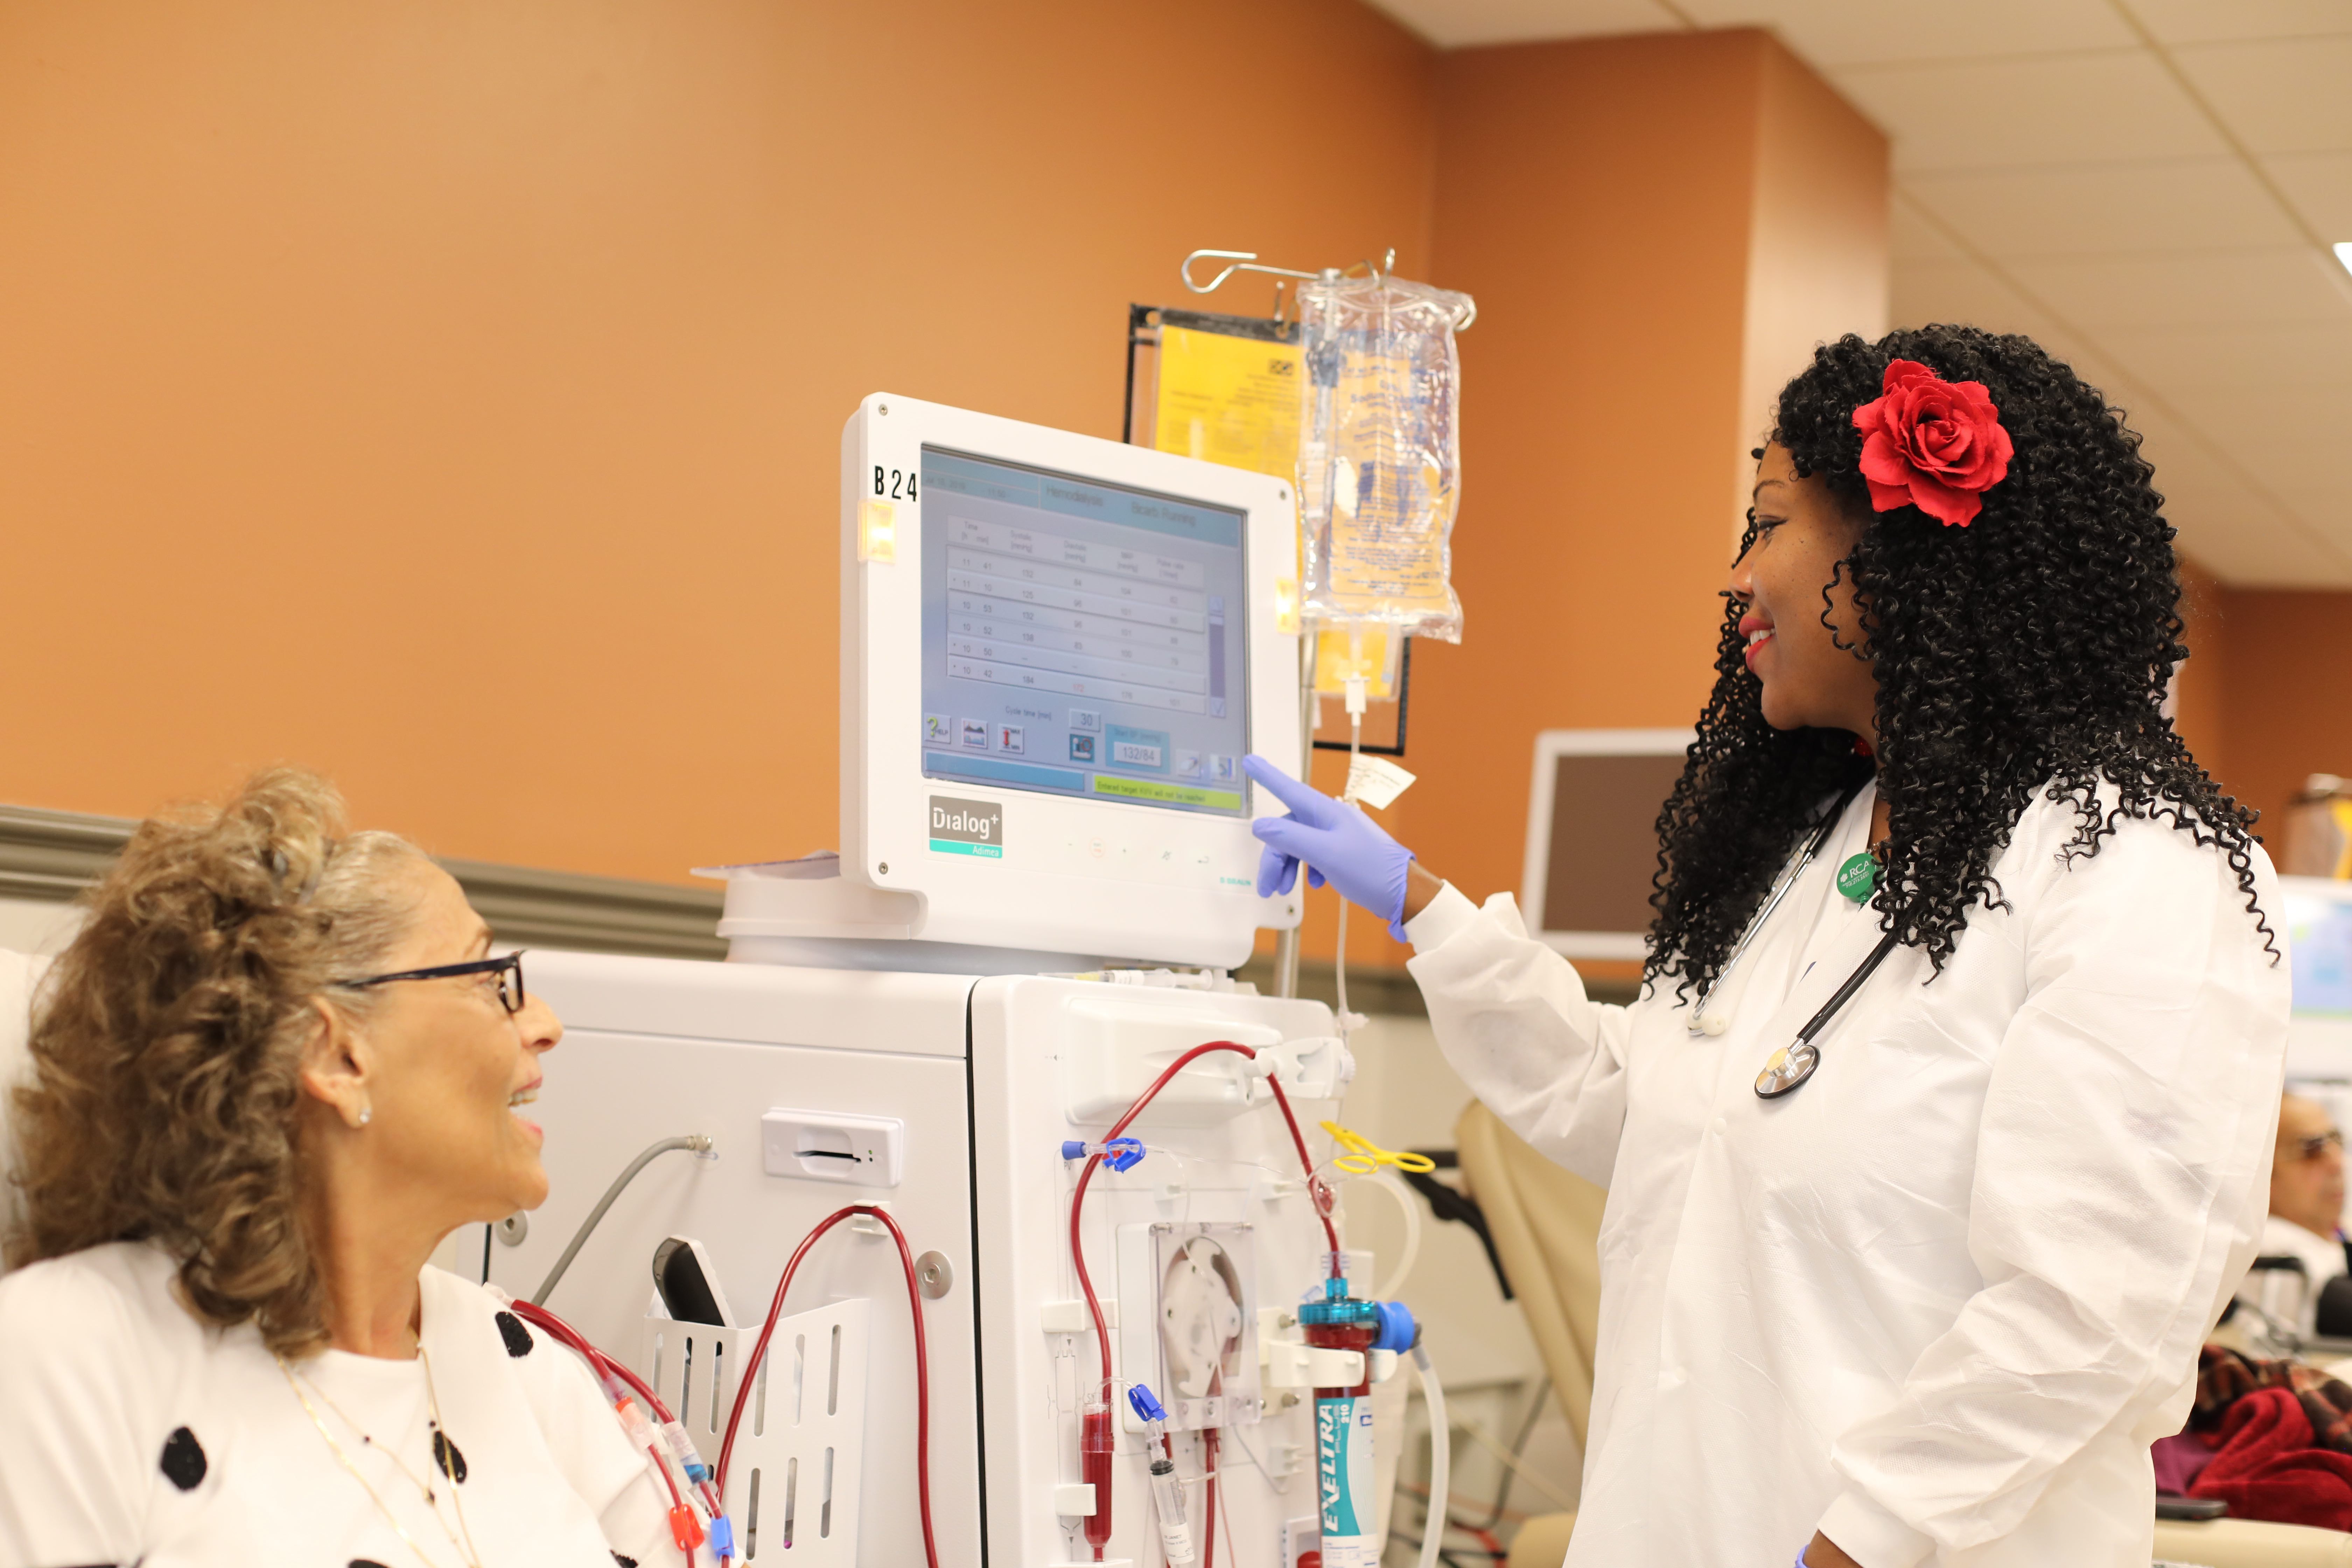 A black female healthcare worker with a red flower in her hair helps a patient at a dialysis station.